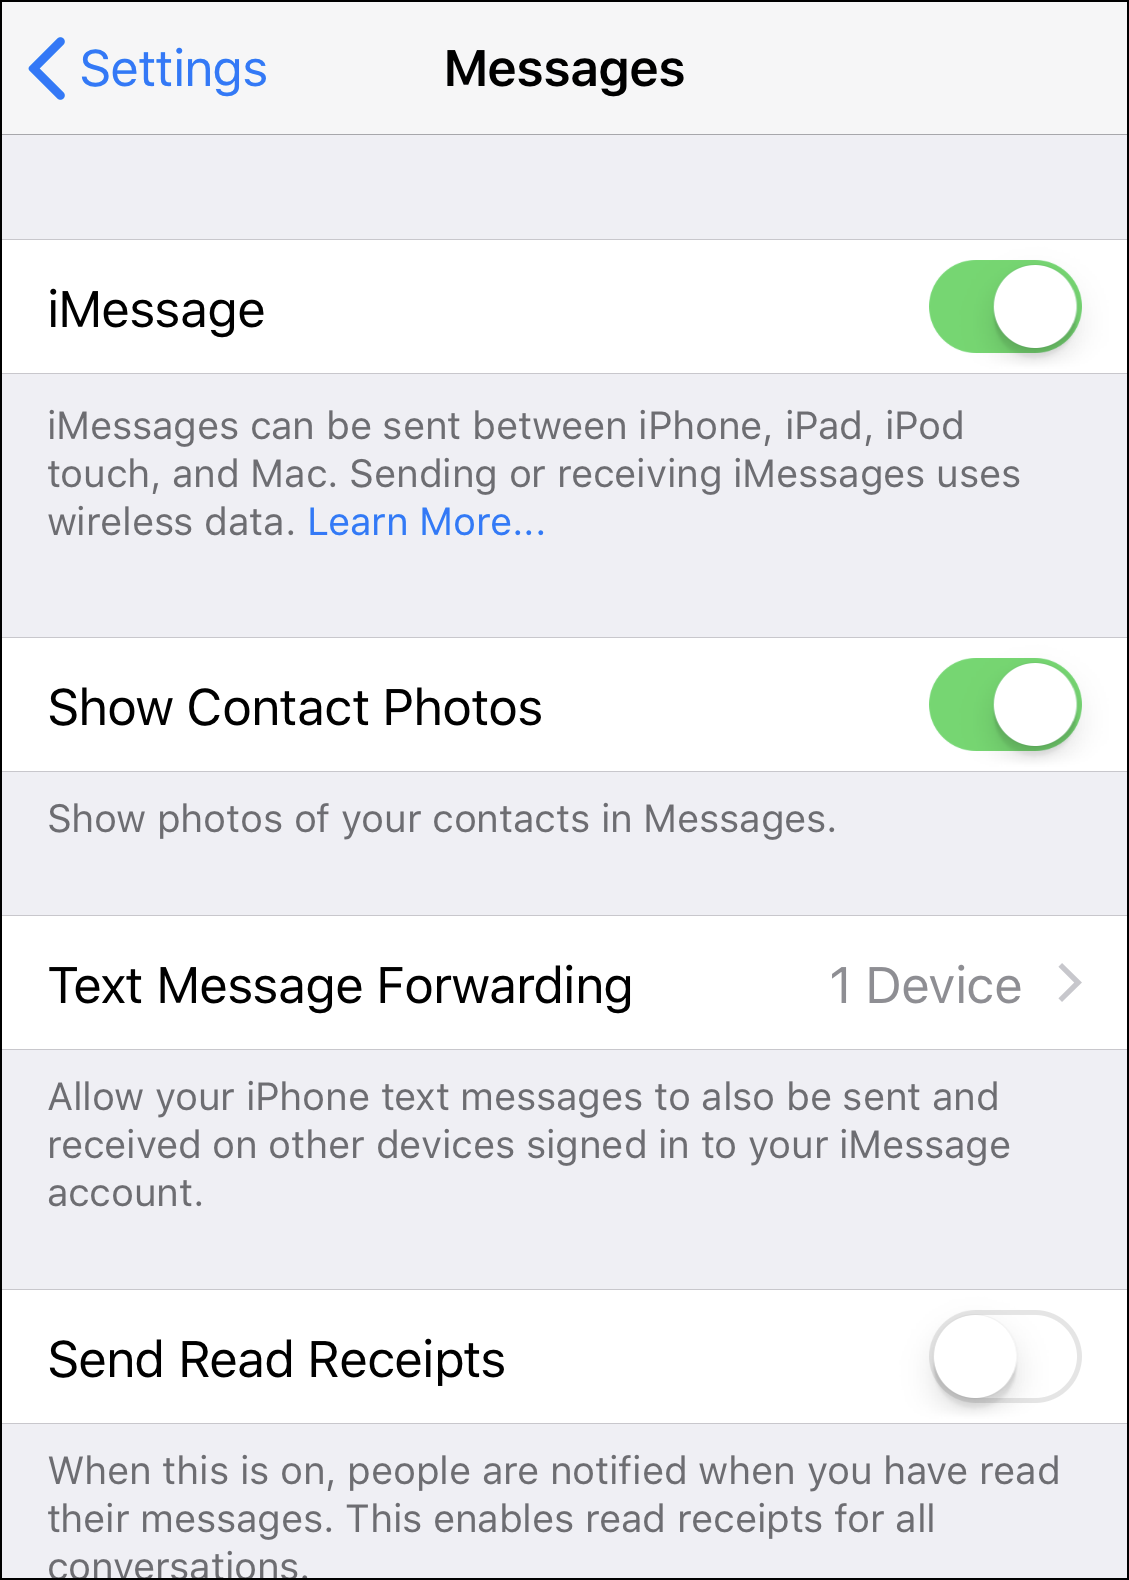 ios 11 settings > messages